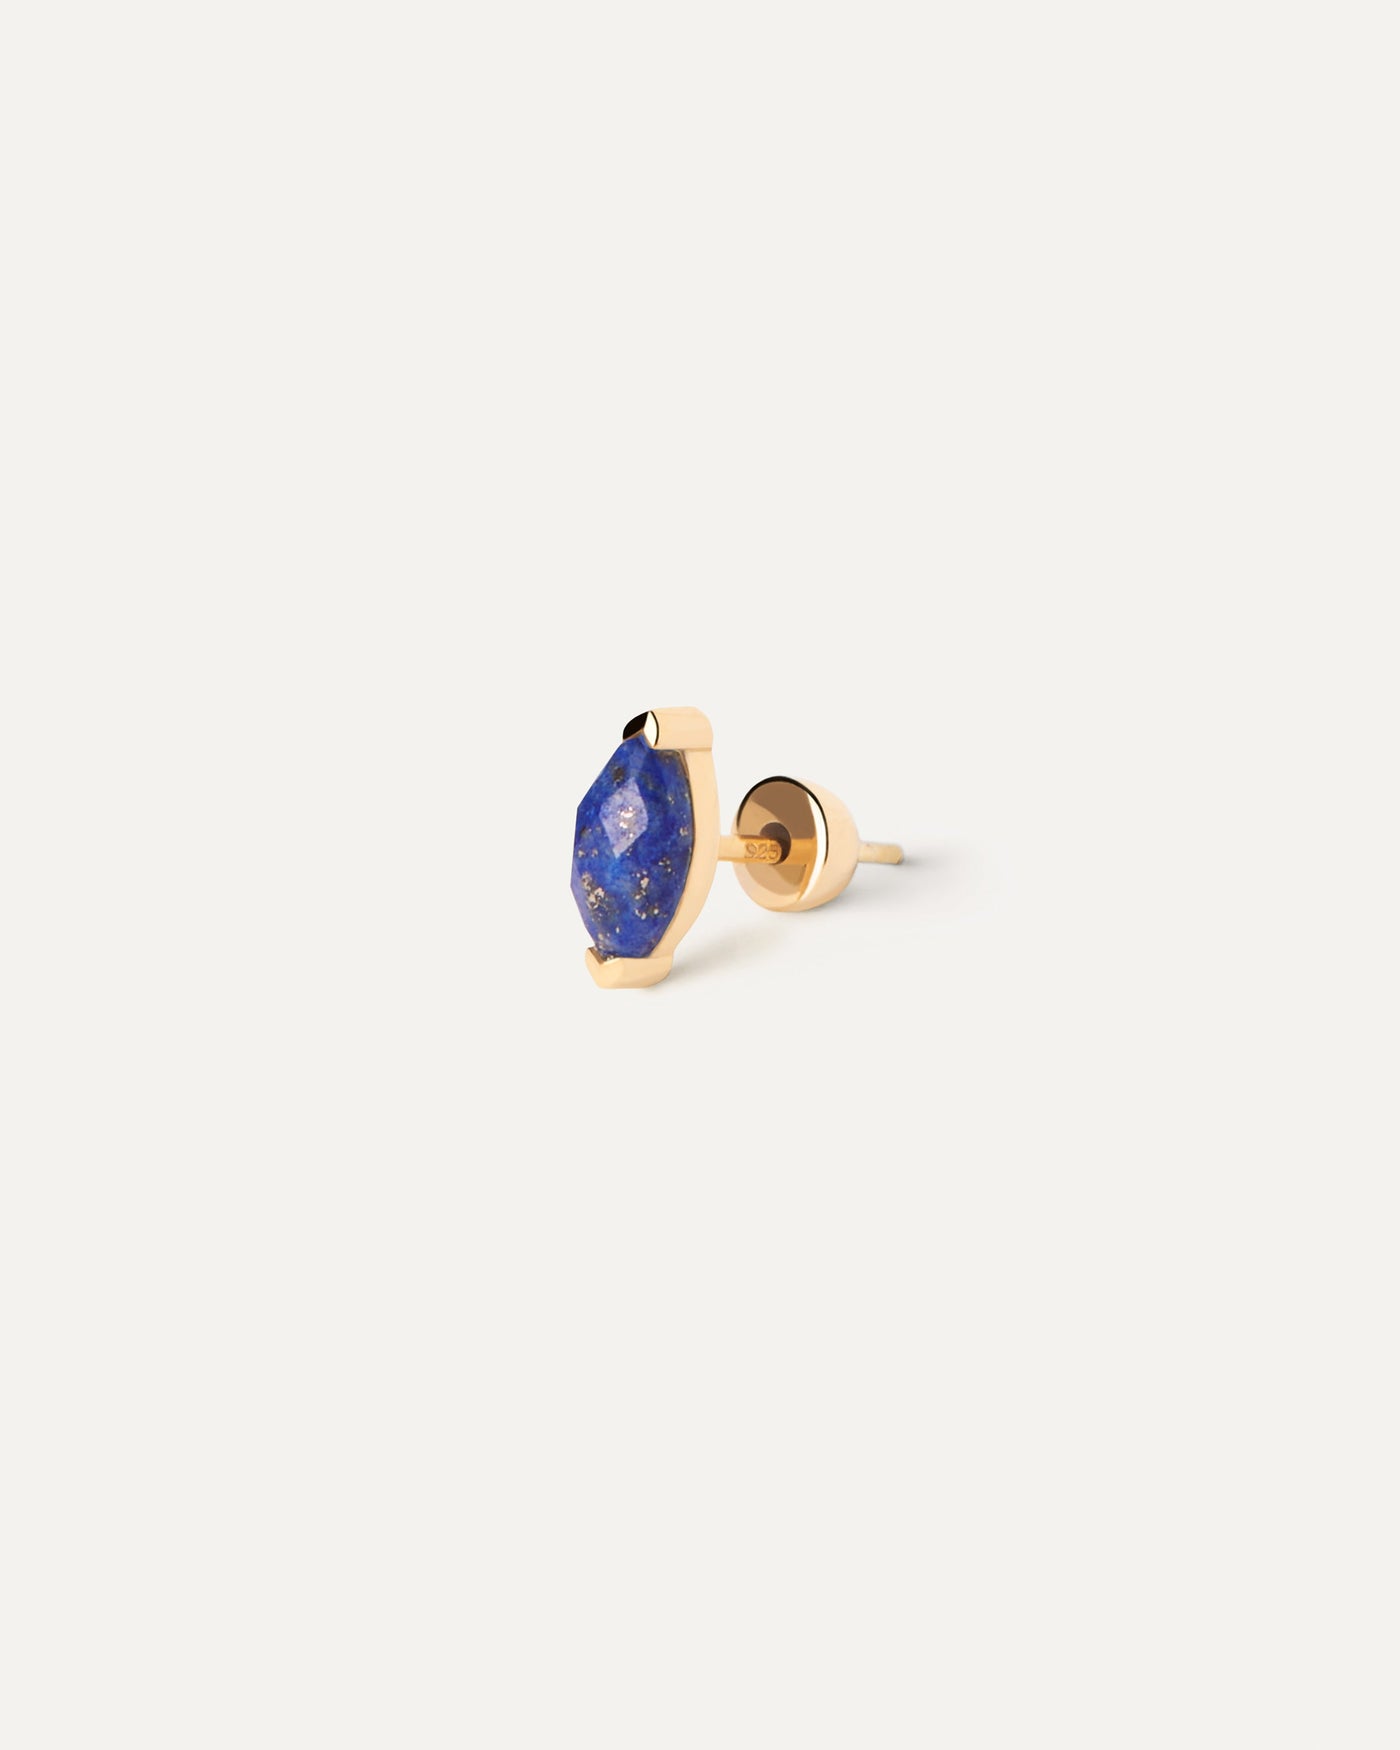 2023 Selection |  Lapis Lazuli Nomad Single Earring. Gold-plated stud earring embellished with marquise cut green gemstone. Get the latest arrival from PDPAOLA. Place your order safely and get this Best Seller. Free Shipping.